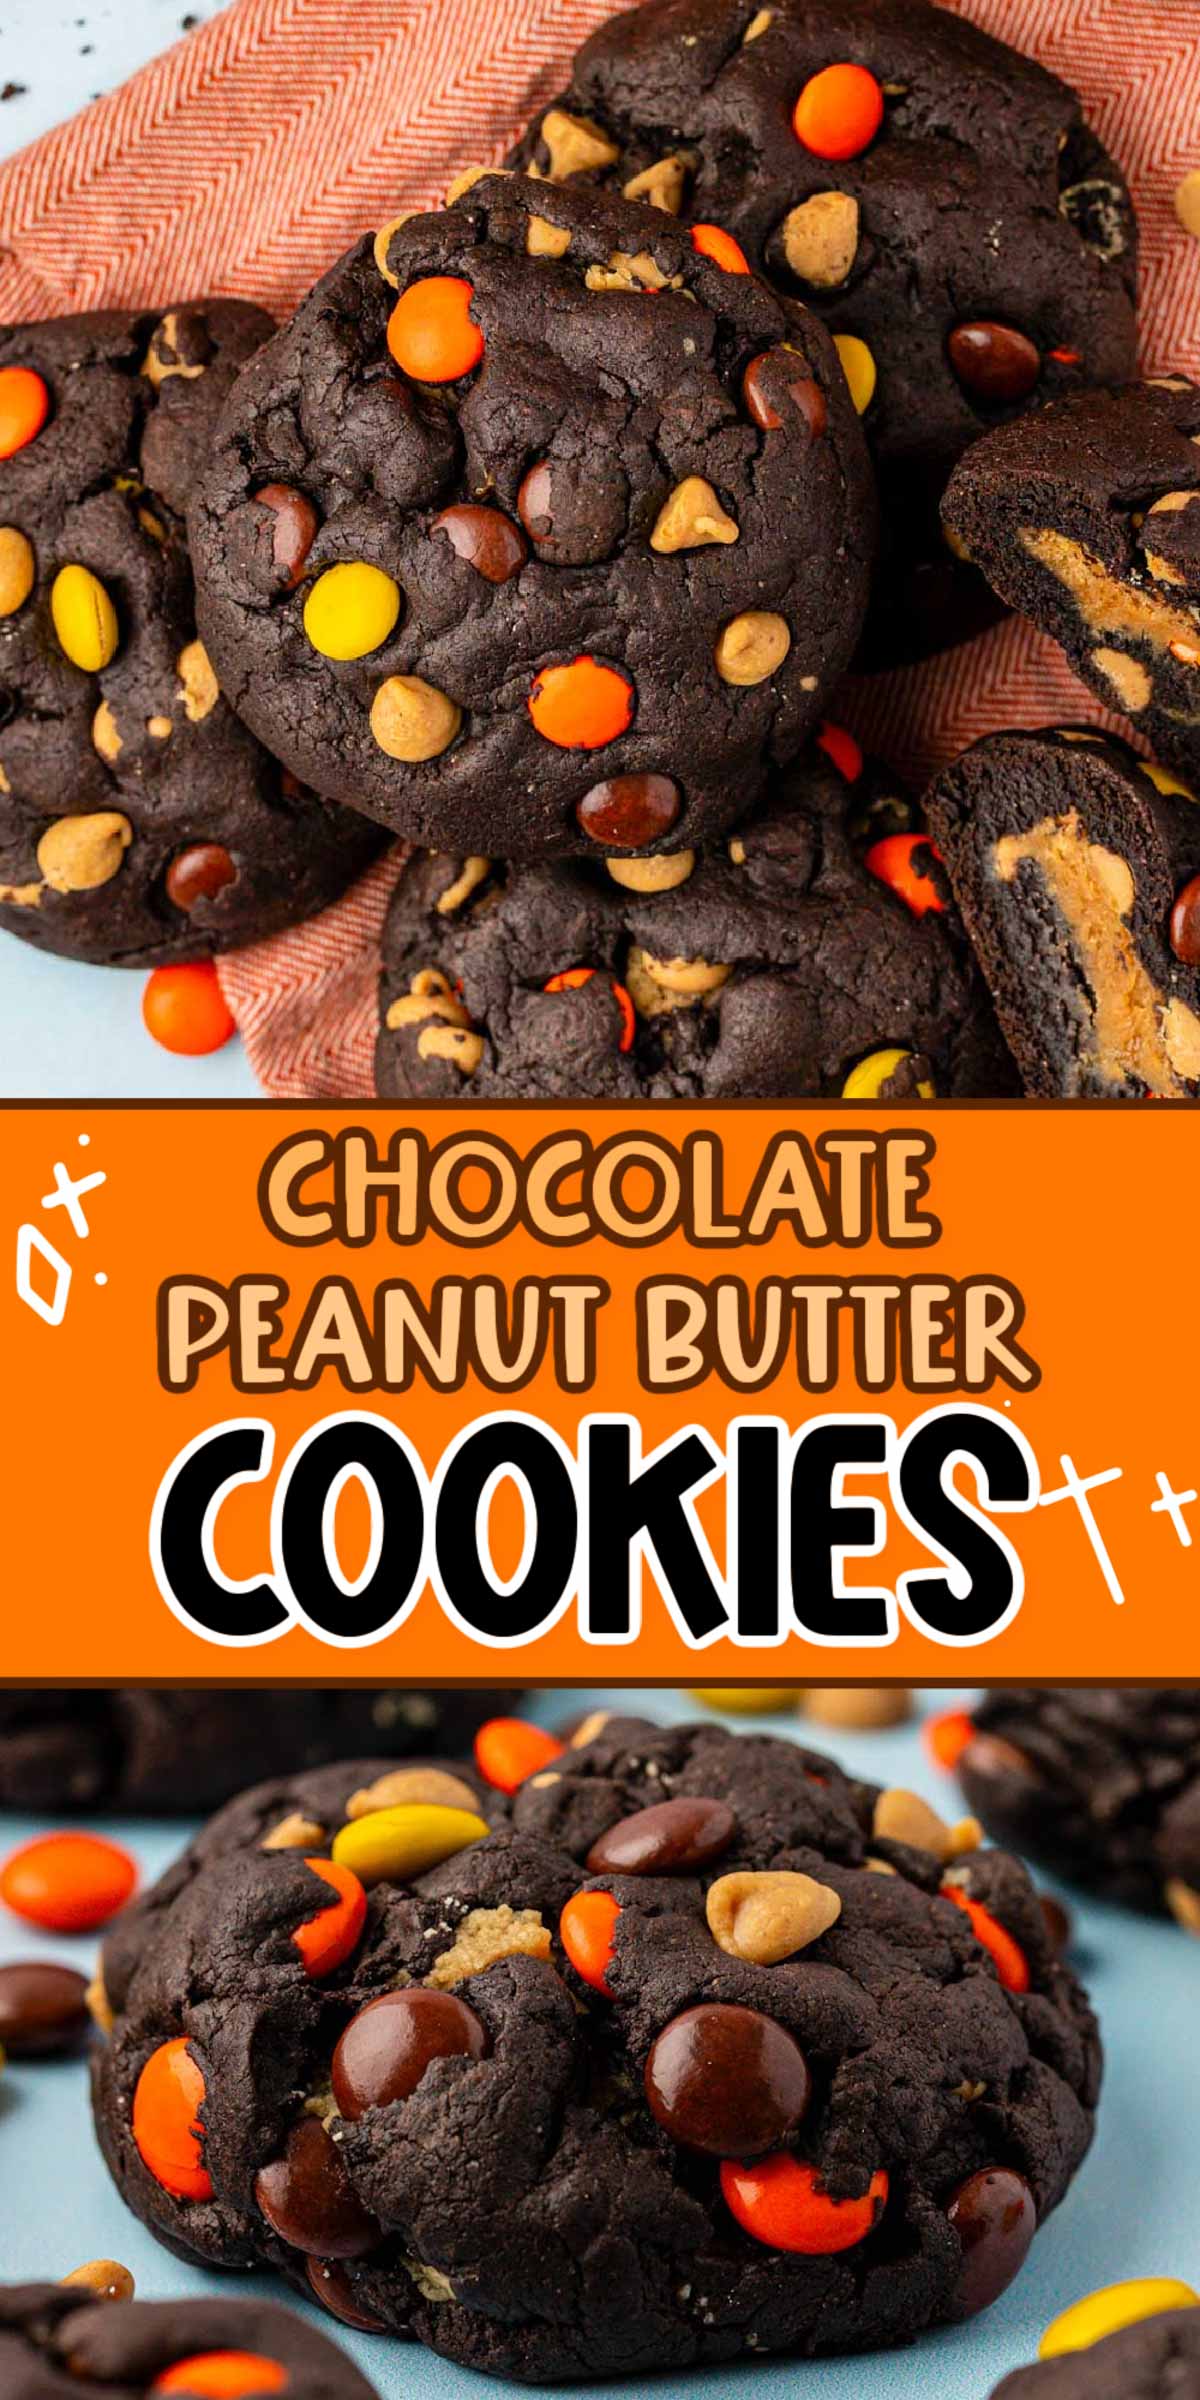 These Chocolate Peanut Butter Cookies are an over-the-top treat that's easy to make and packed with delicious chocolaty peanut butter flavor! This recipe has you meeting your new favorite cookie in under an hour! via @sugarandsoulco